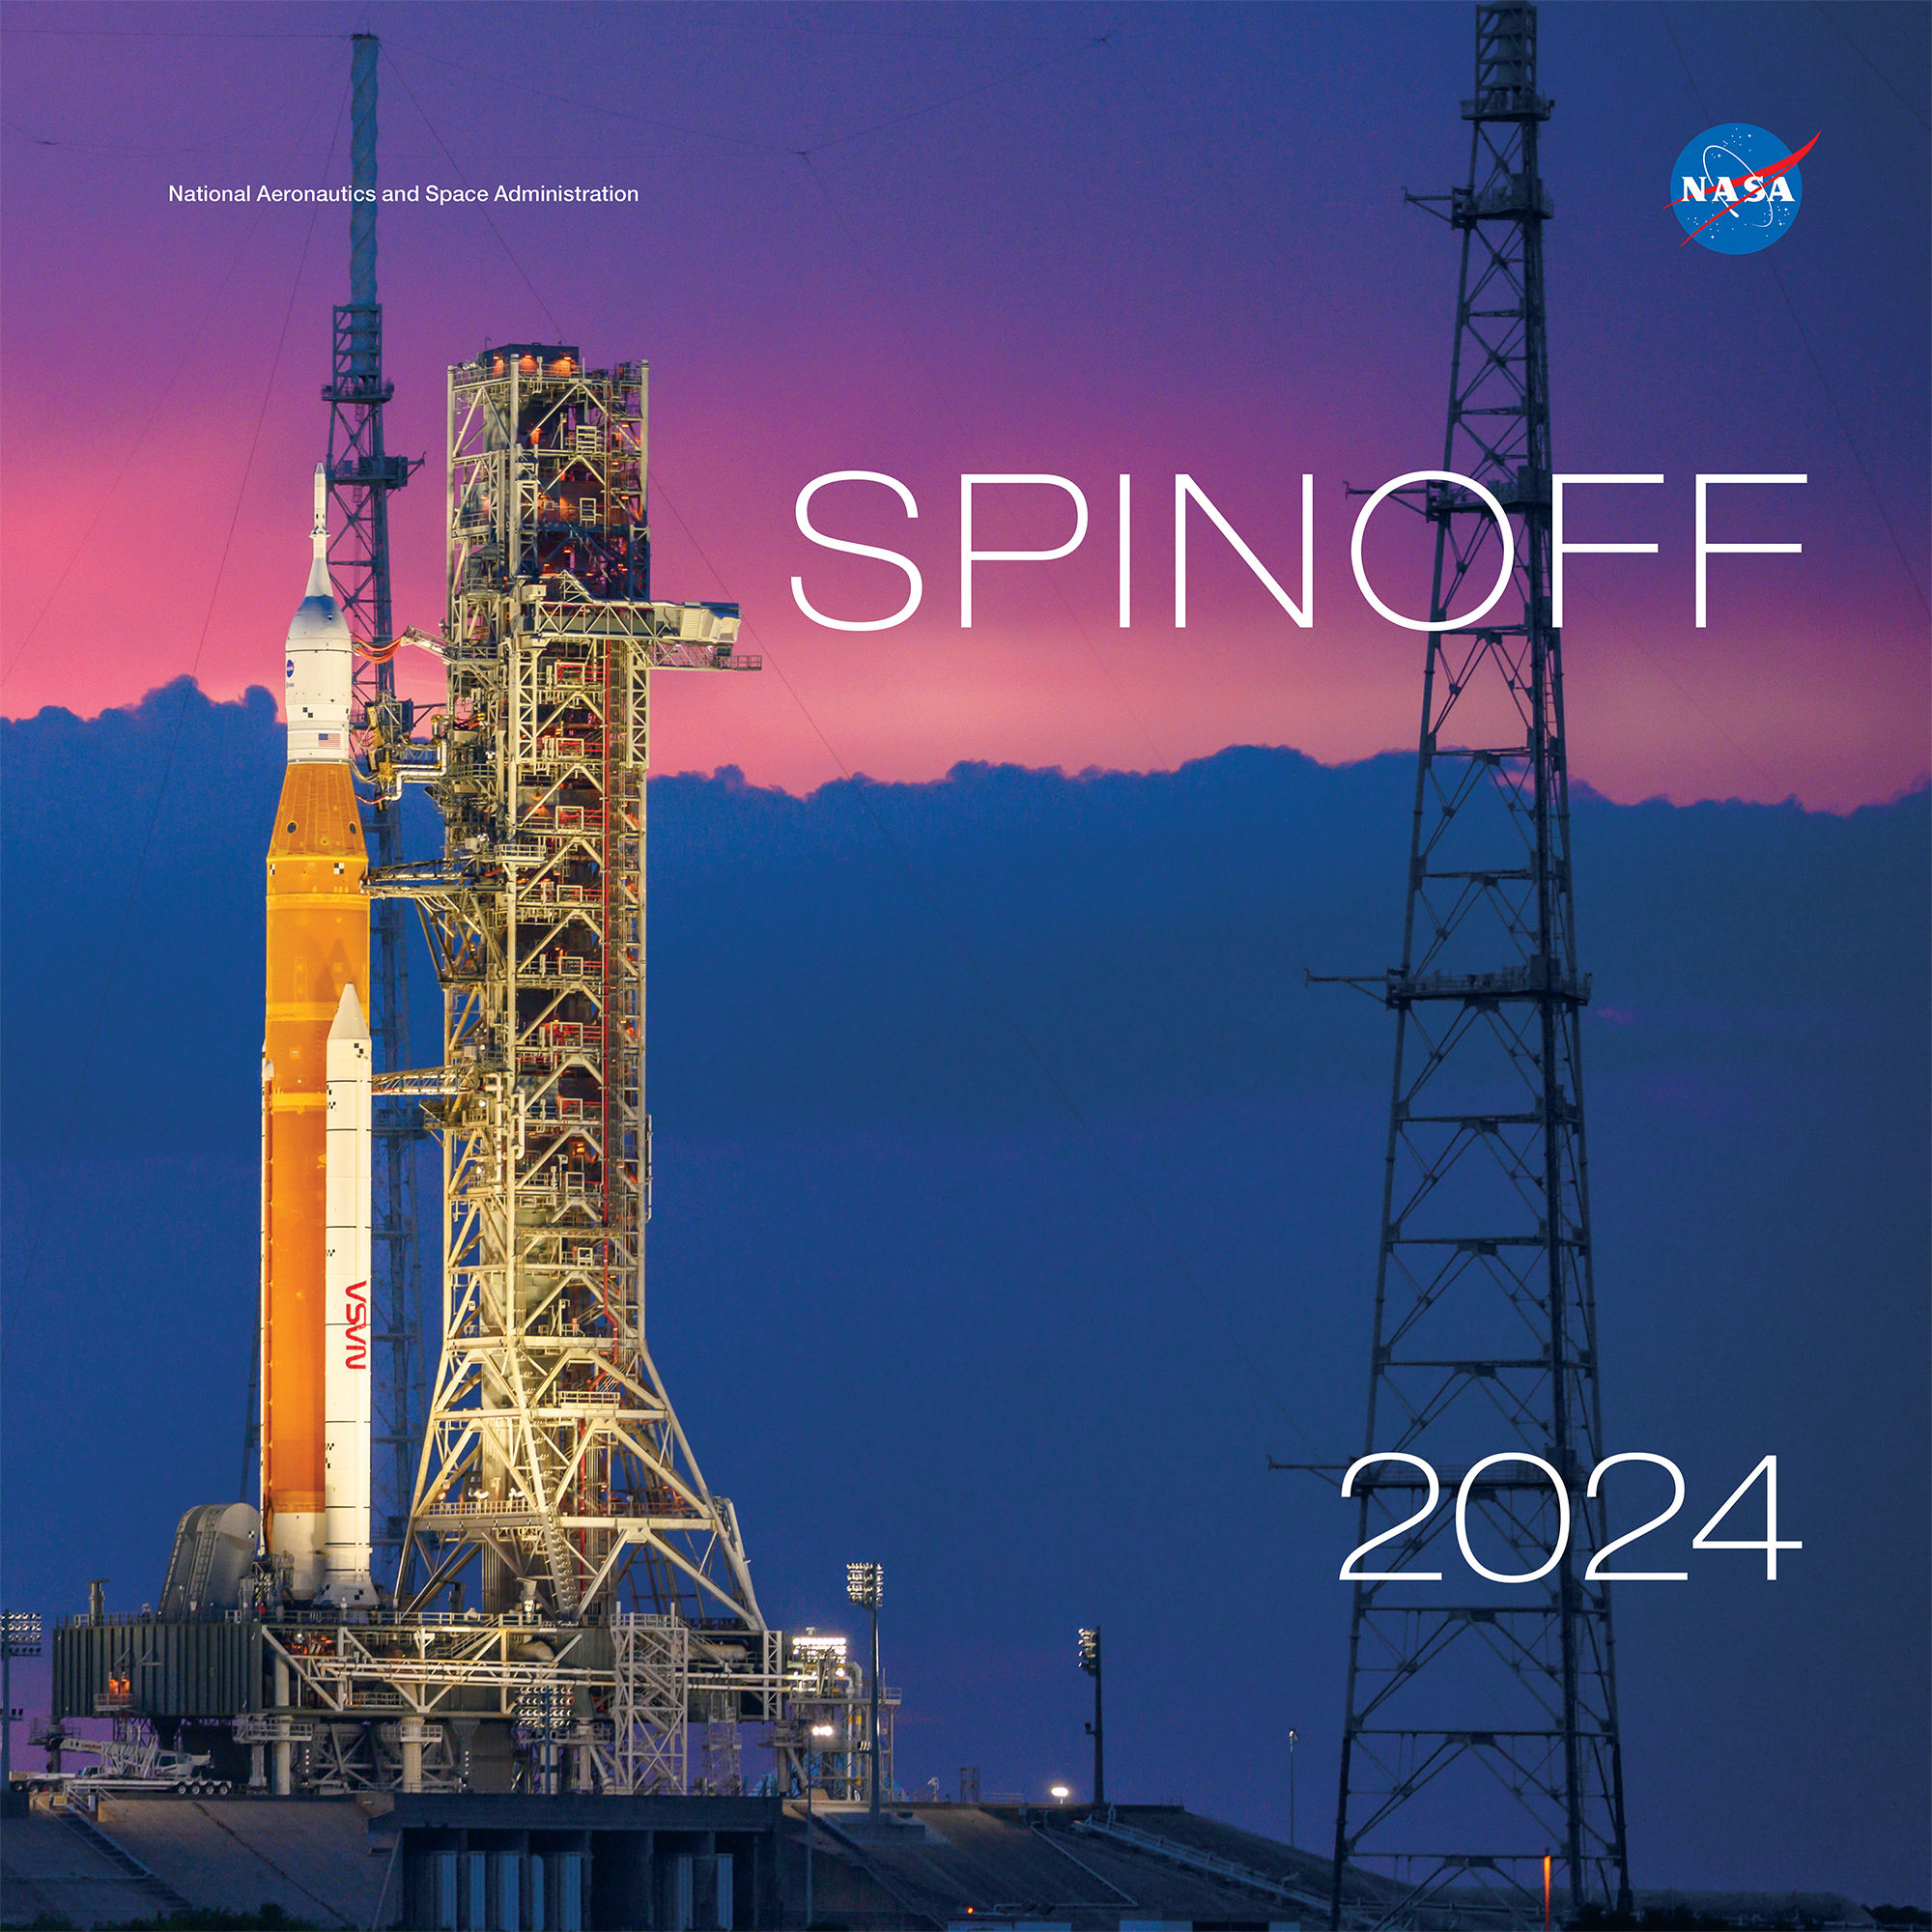 2024 Spinoff Cover, NASA Launch site and pink, blue skies